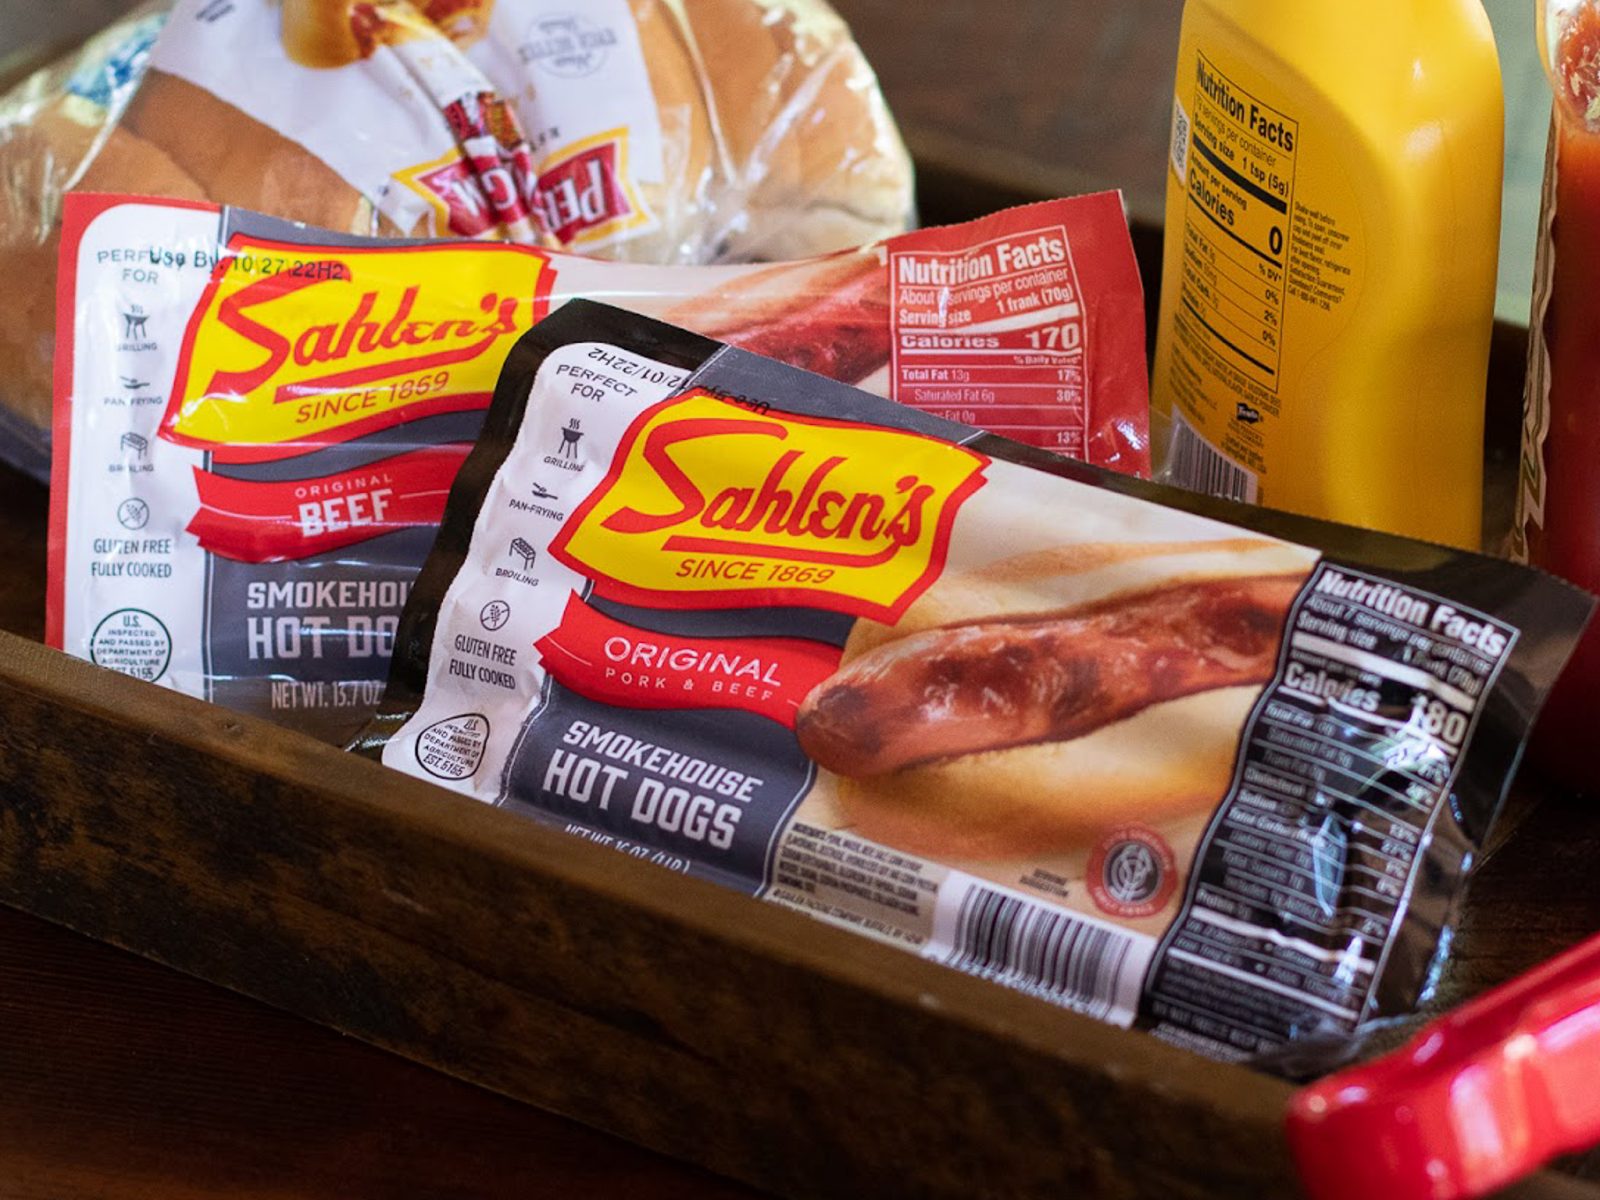 Get Sahlen’s Hot Dogs For Just $3 Per Pack At Publix